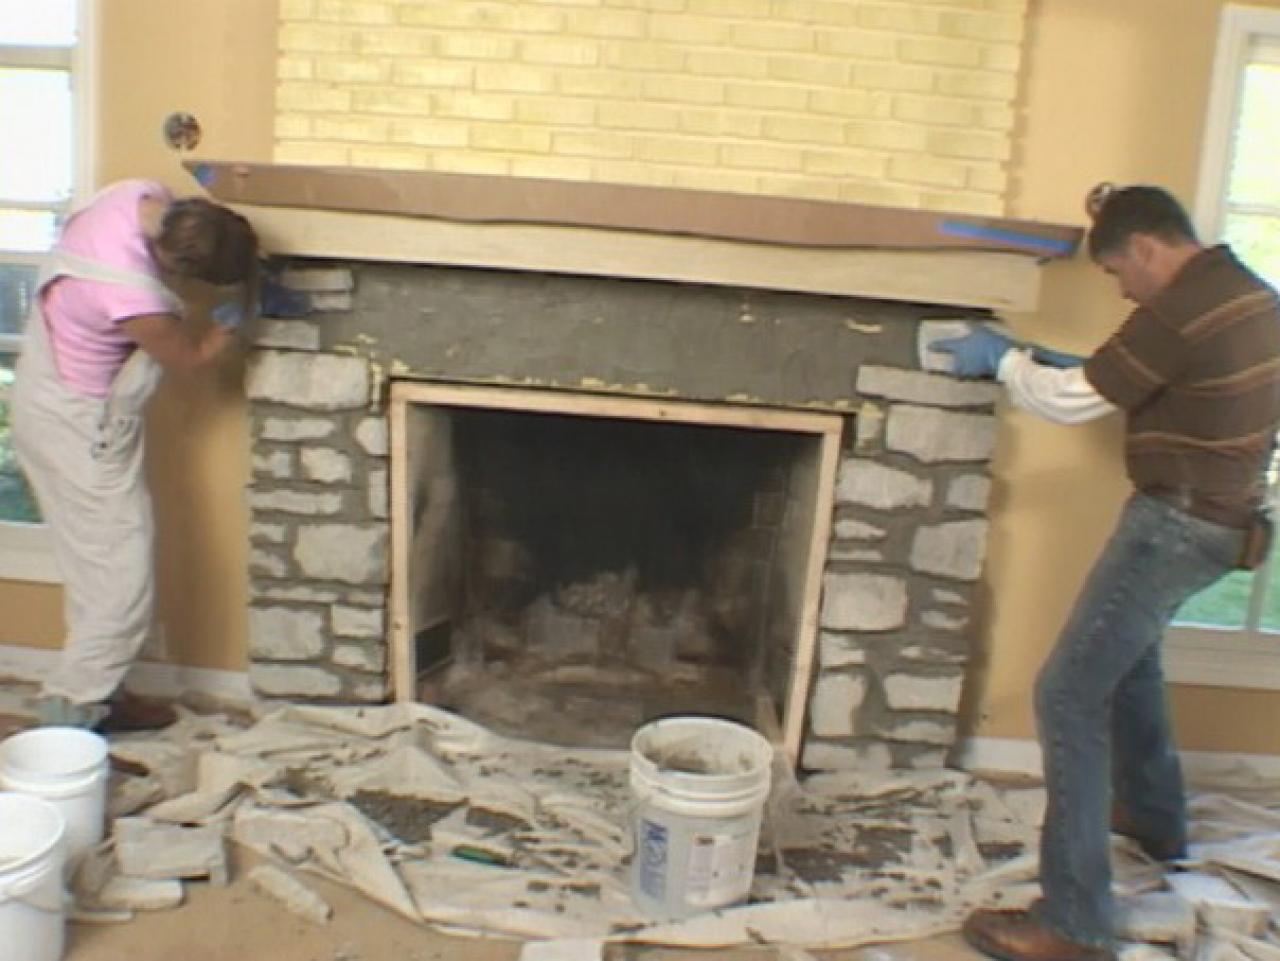 Use these step-by-step instructions from DIYNetwork.com experts to build a fireplace mantel and add stone veneer facing.